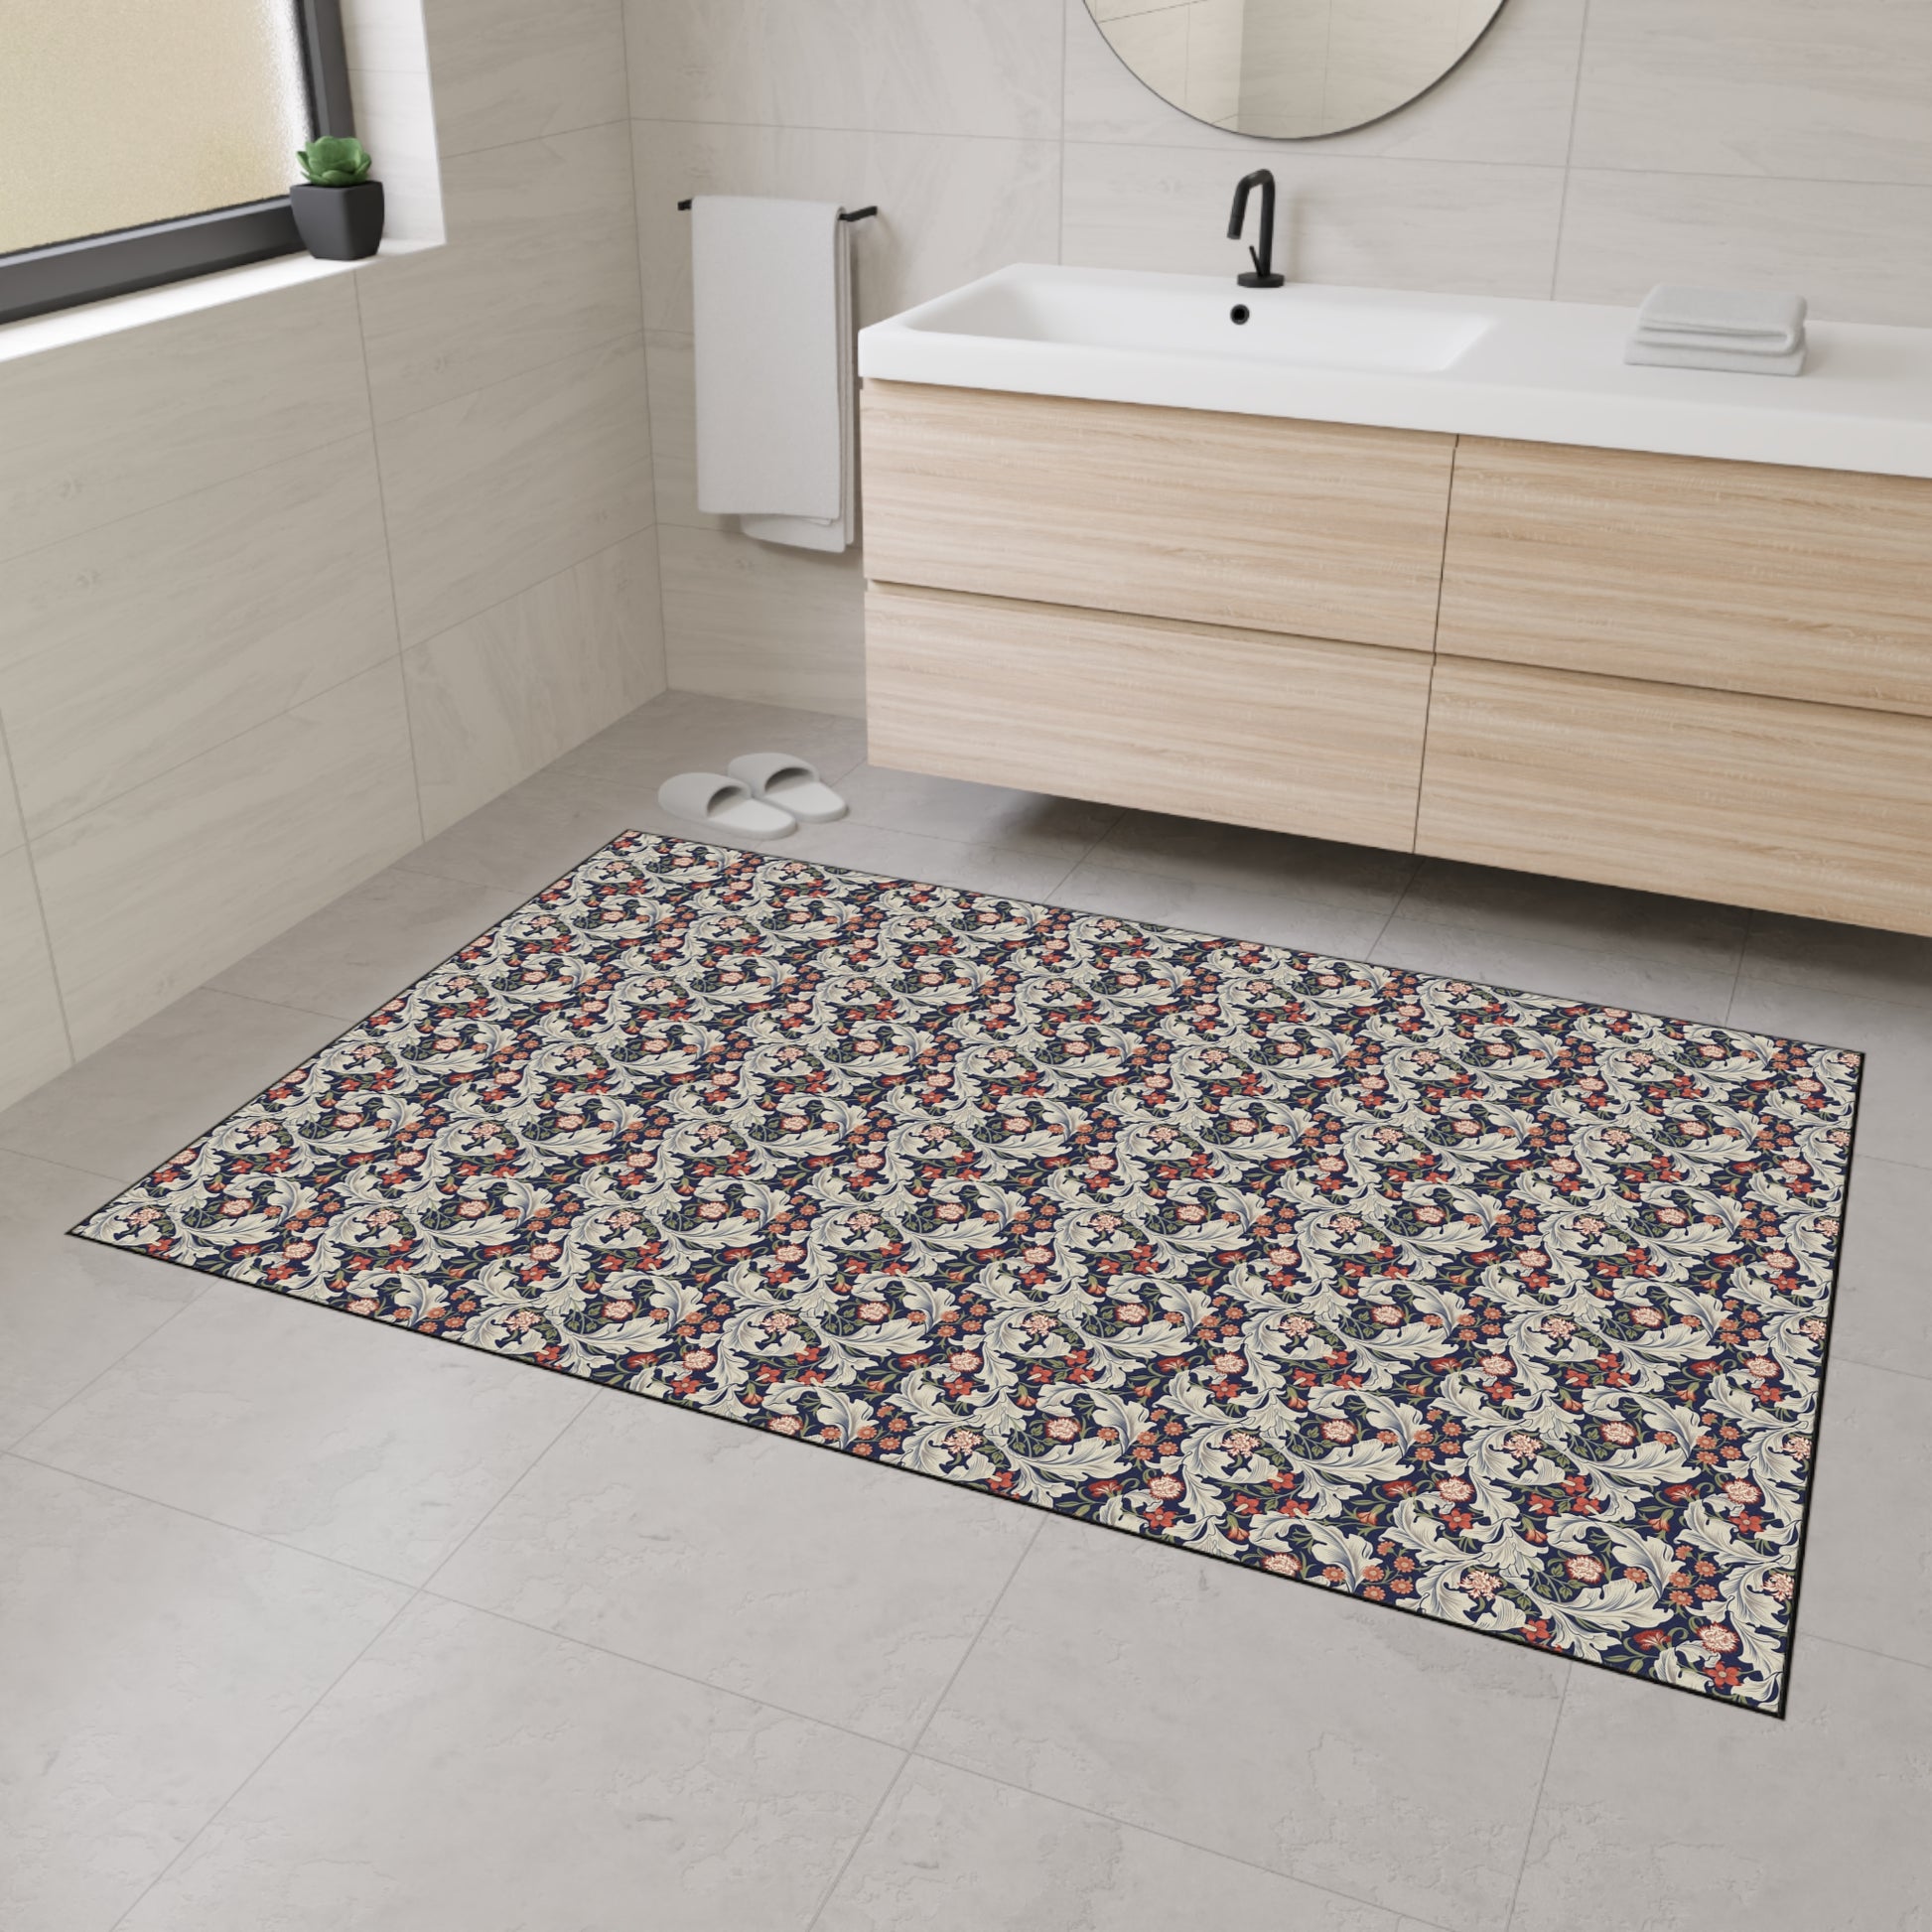 william-morris-co-heavy-duty-floor-mat-leicester-collection-royal-8